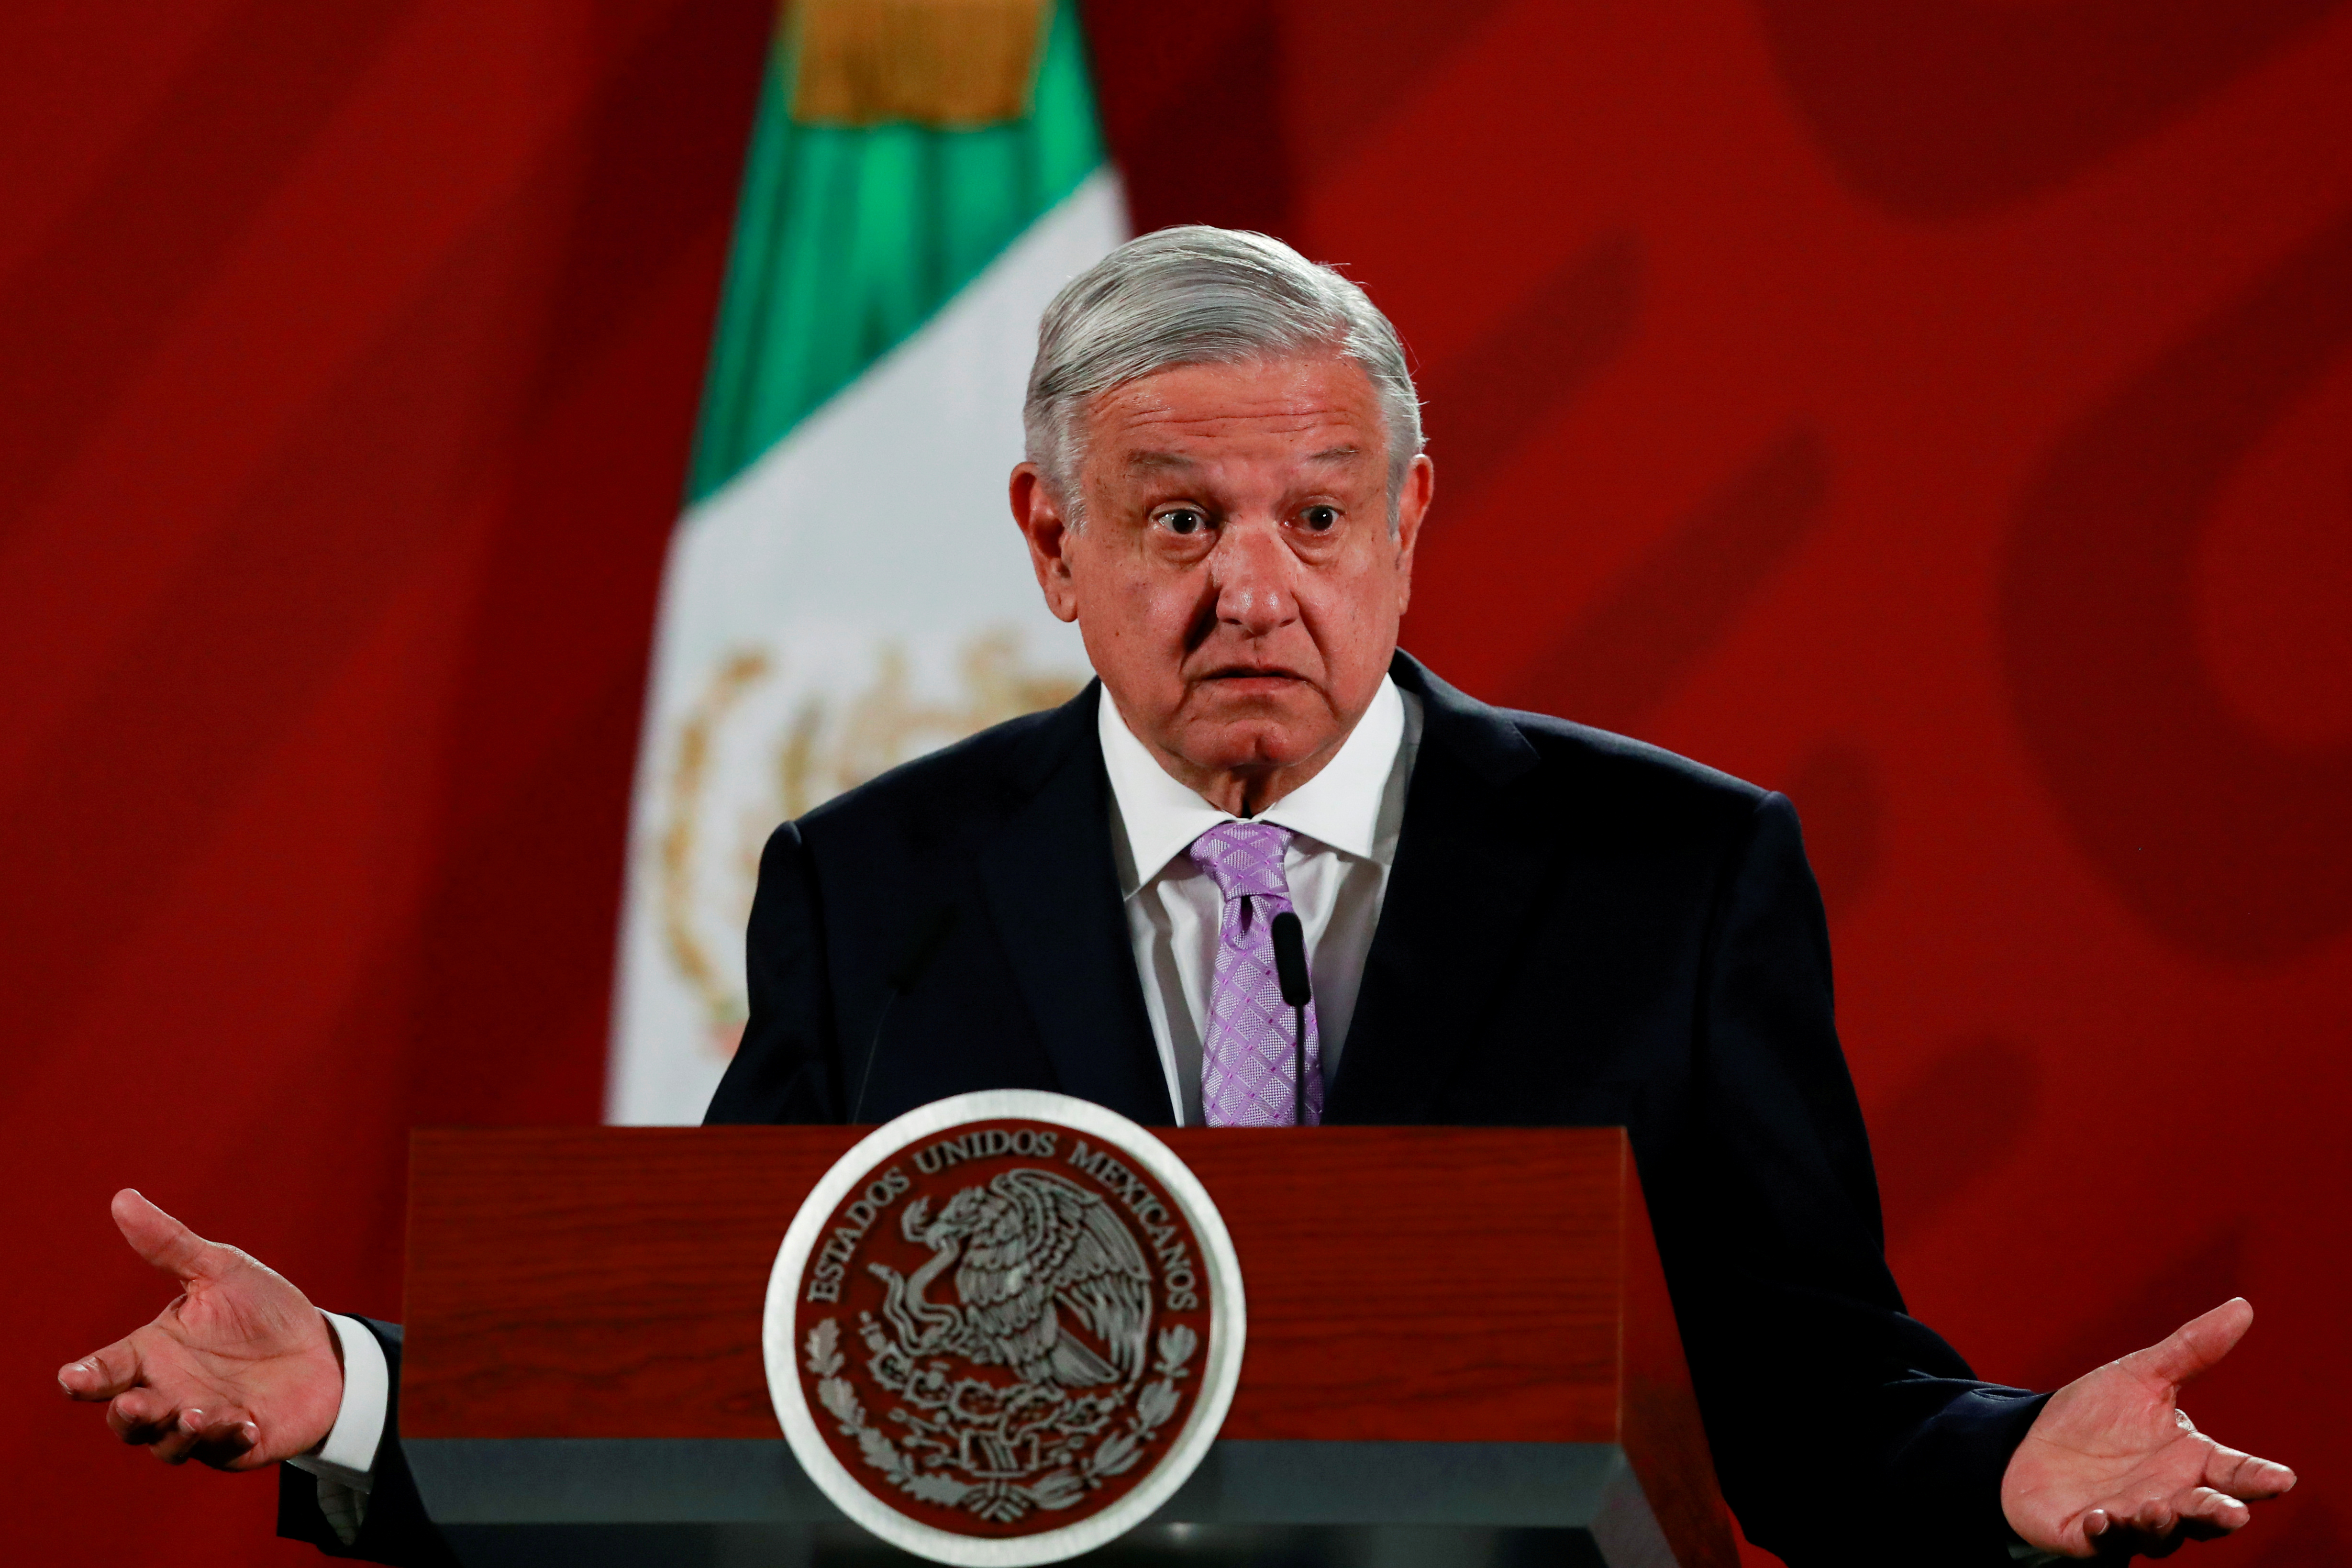 FILE PHOTO: Mexico's President Andres Manuel Lopez Obrador gestures as he speaks during a news conference at the National Palace in Mexico City, Mexico February 18, 2020. REUTERS/Henry Romero/File Photo